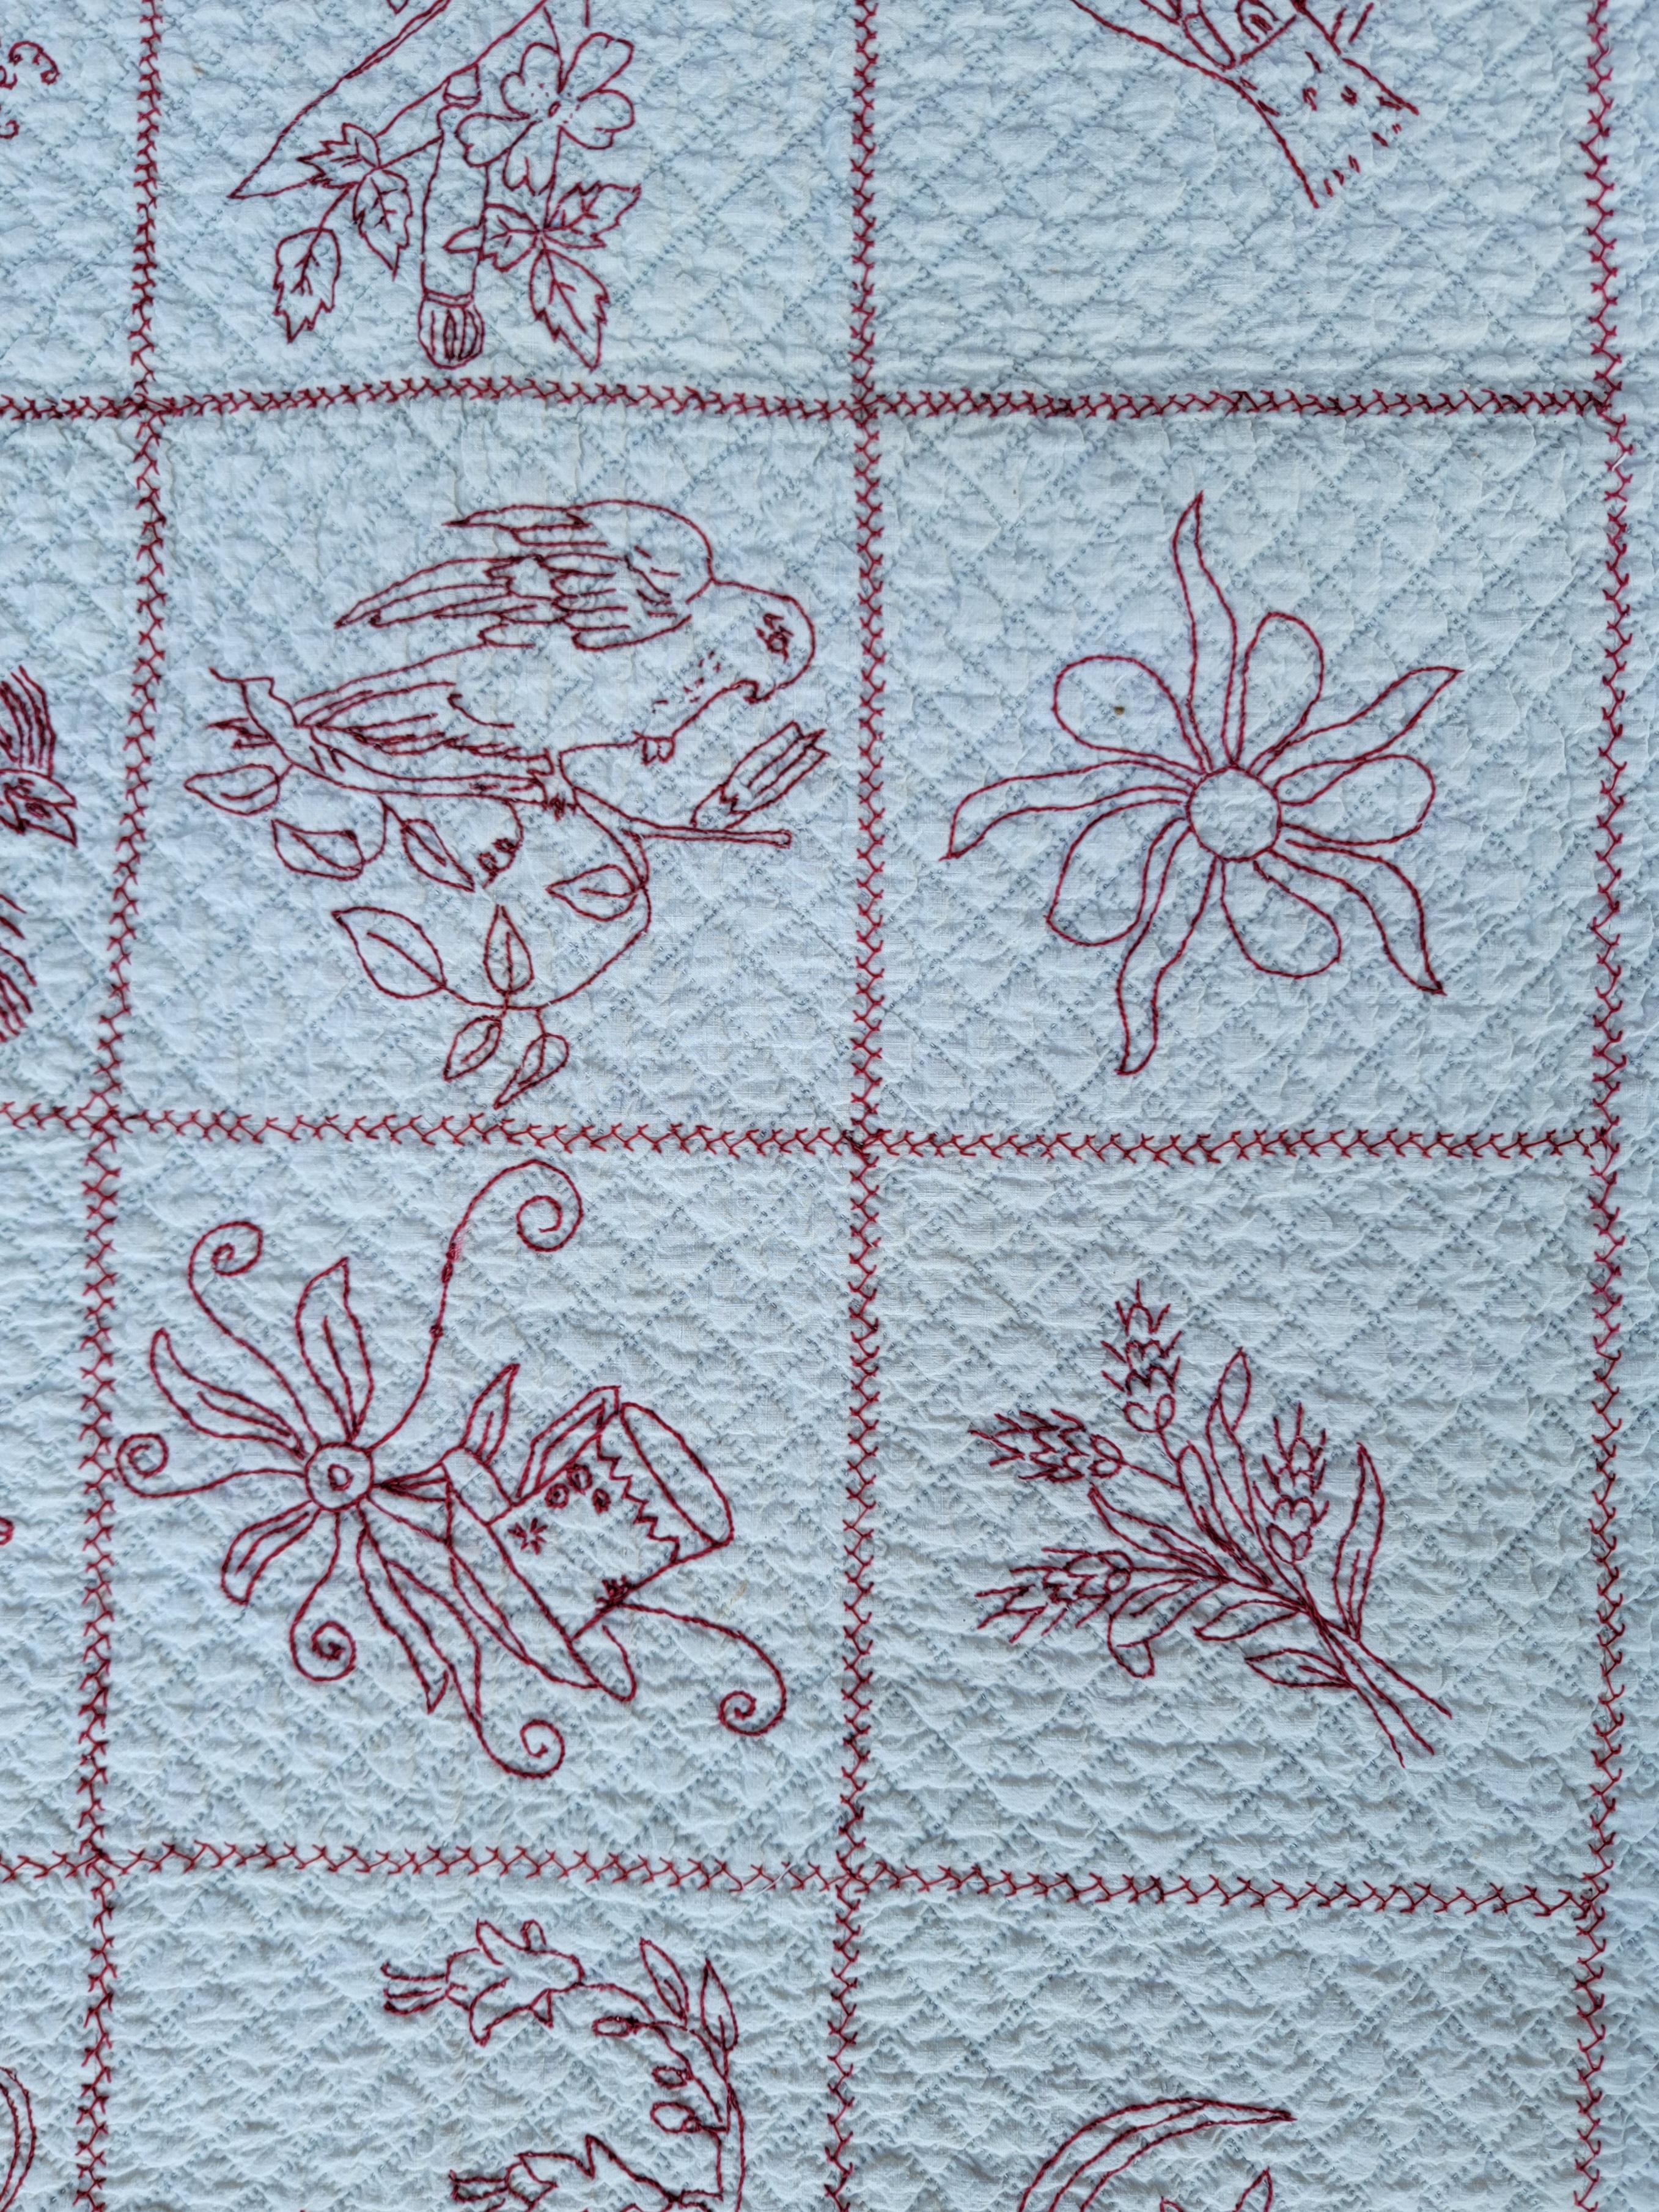 Hand-Crafted 19th C Signed & Dated 1898 Embroidered Sampler Quilt For Sale